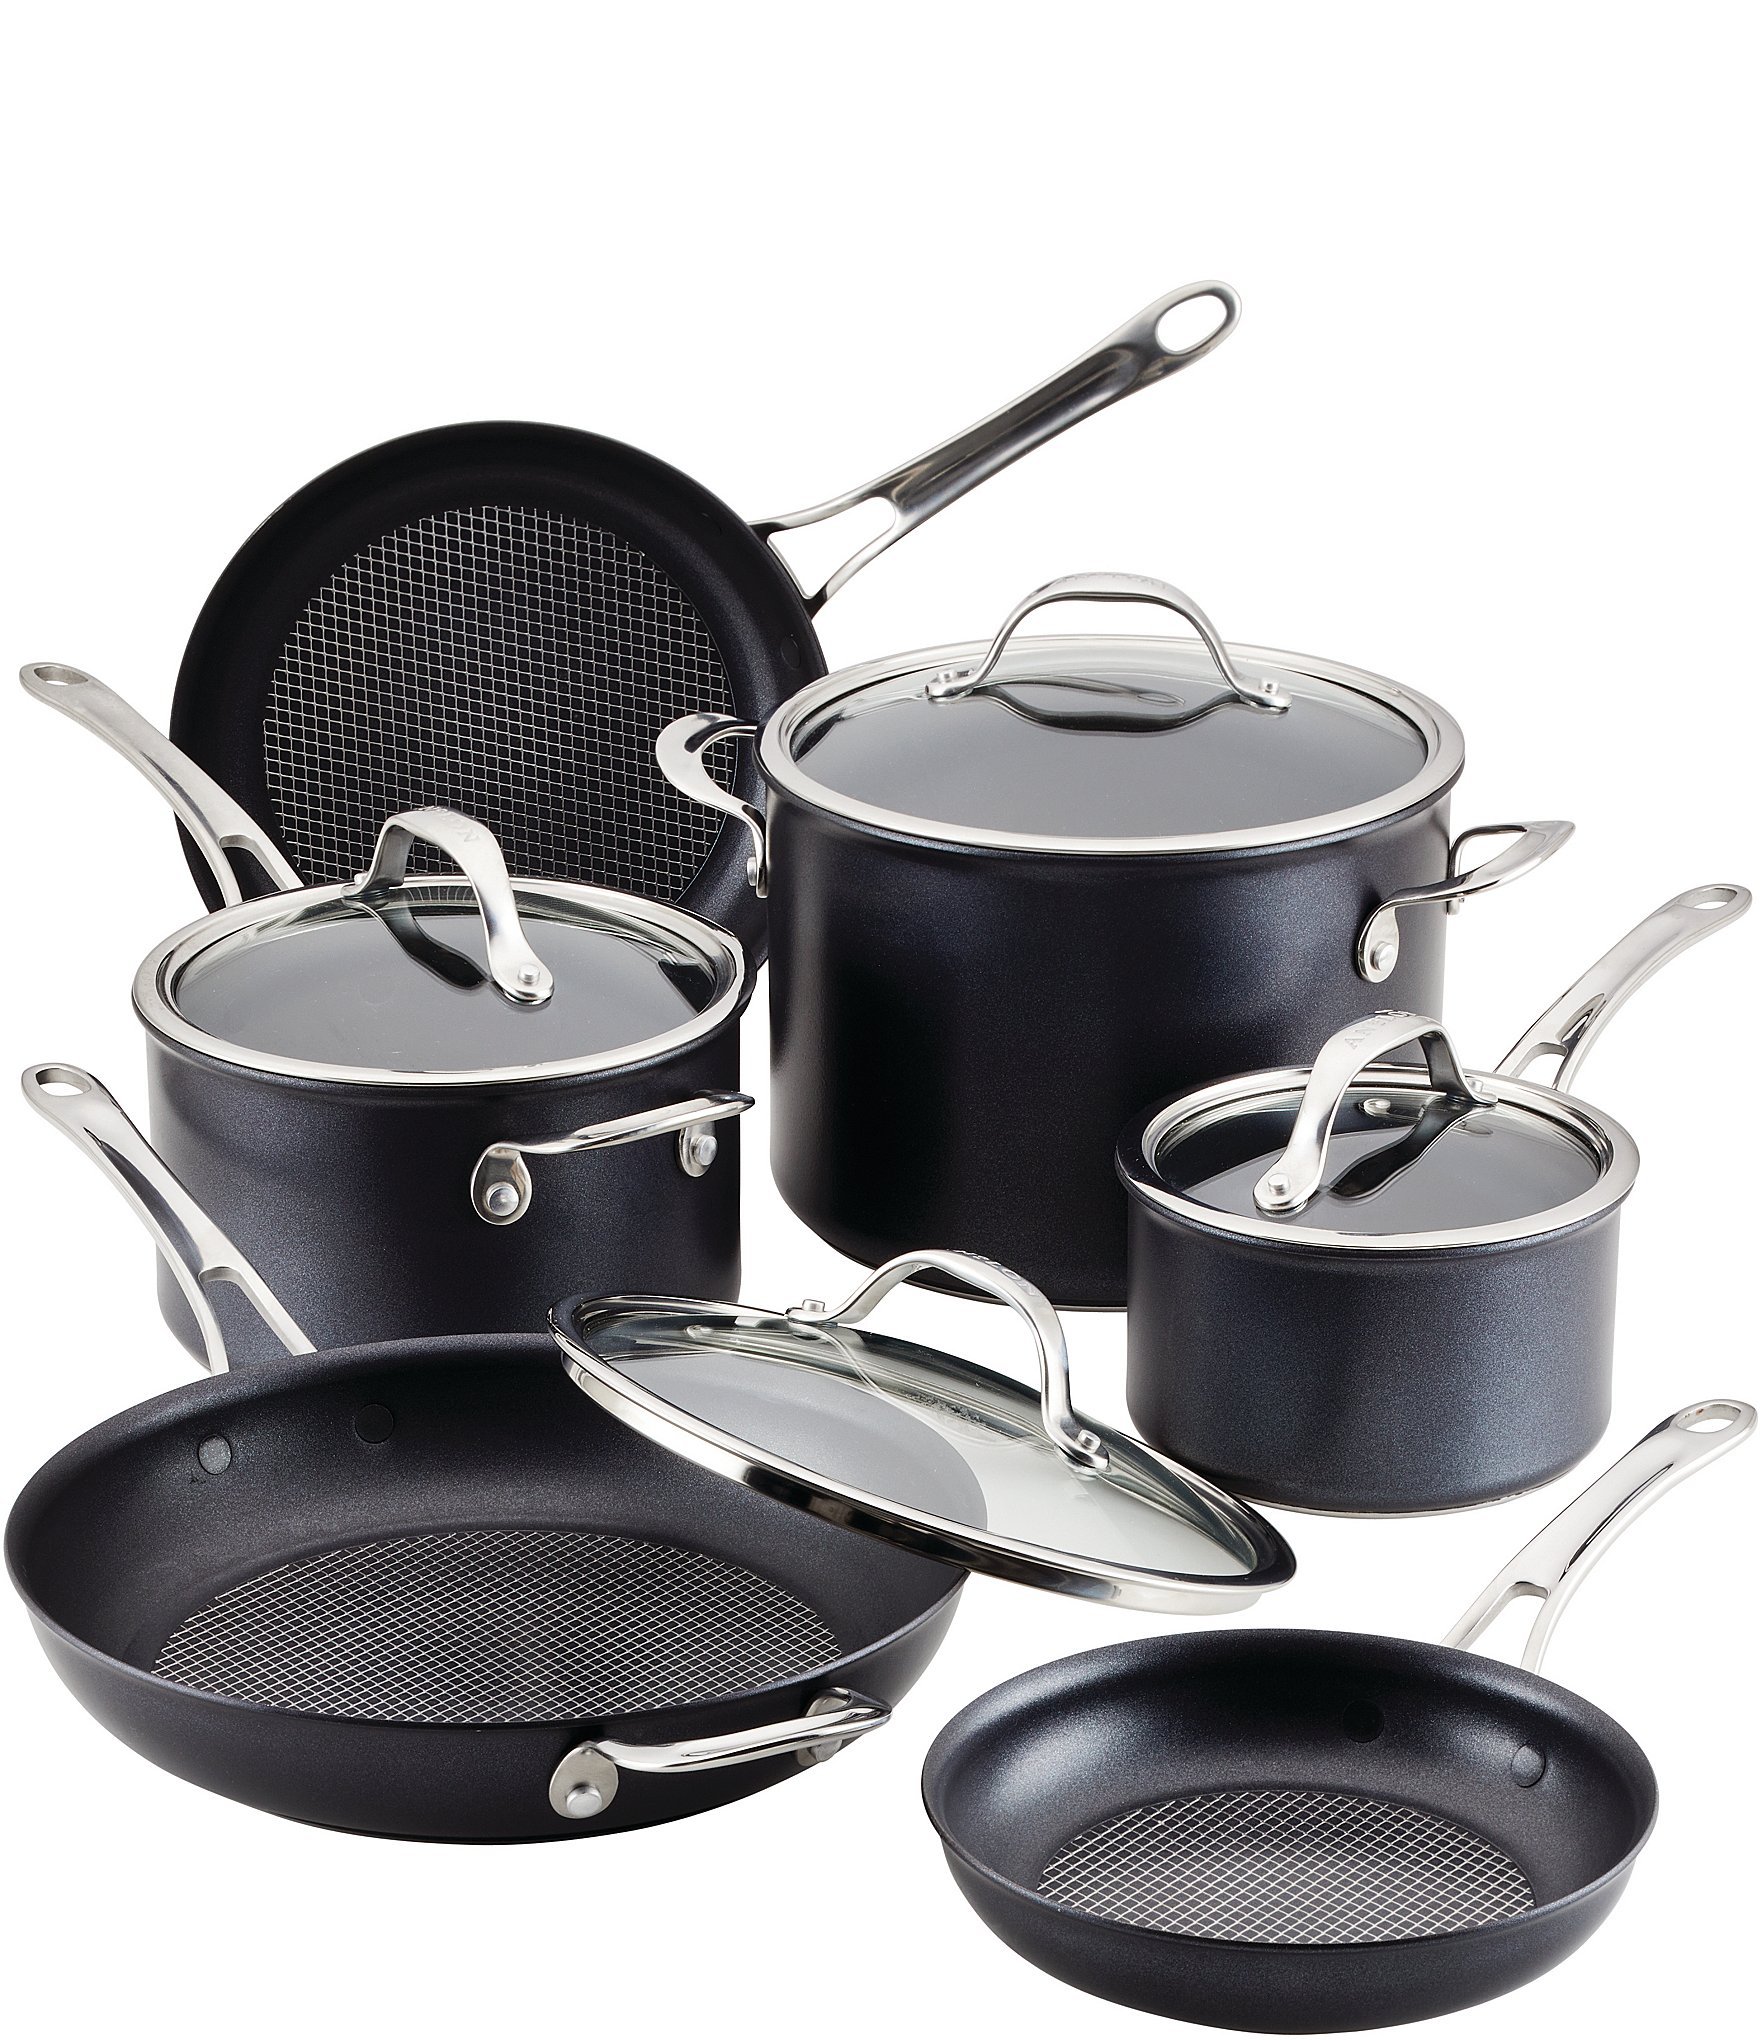 Greater Goods Party of Four Cook Kit - 10 Piece Nonstick Cookware Set for a  Complete Kitchen | Non Toxic, Teflon Free Pots and Pans Work on All